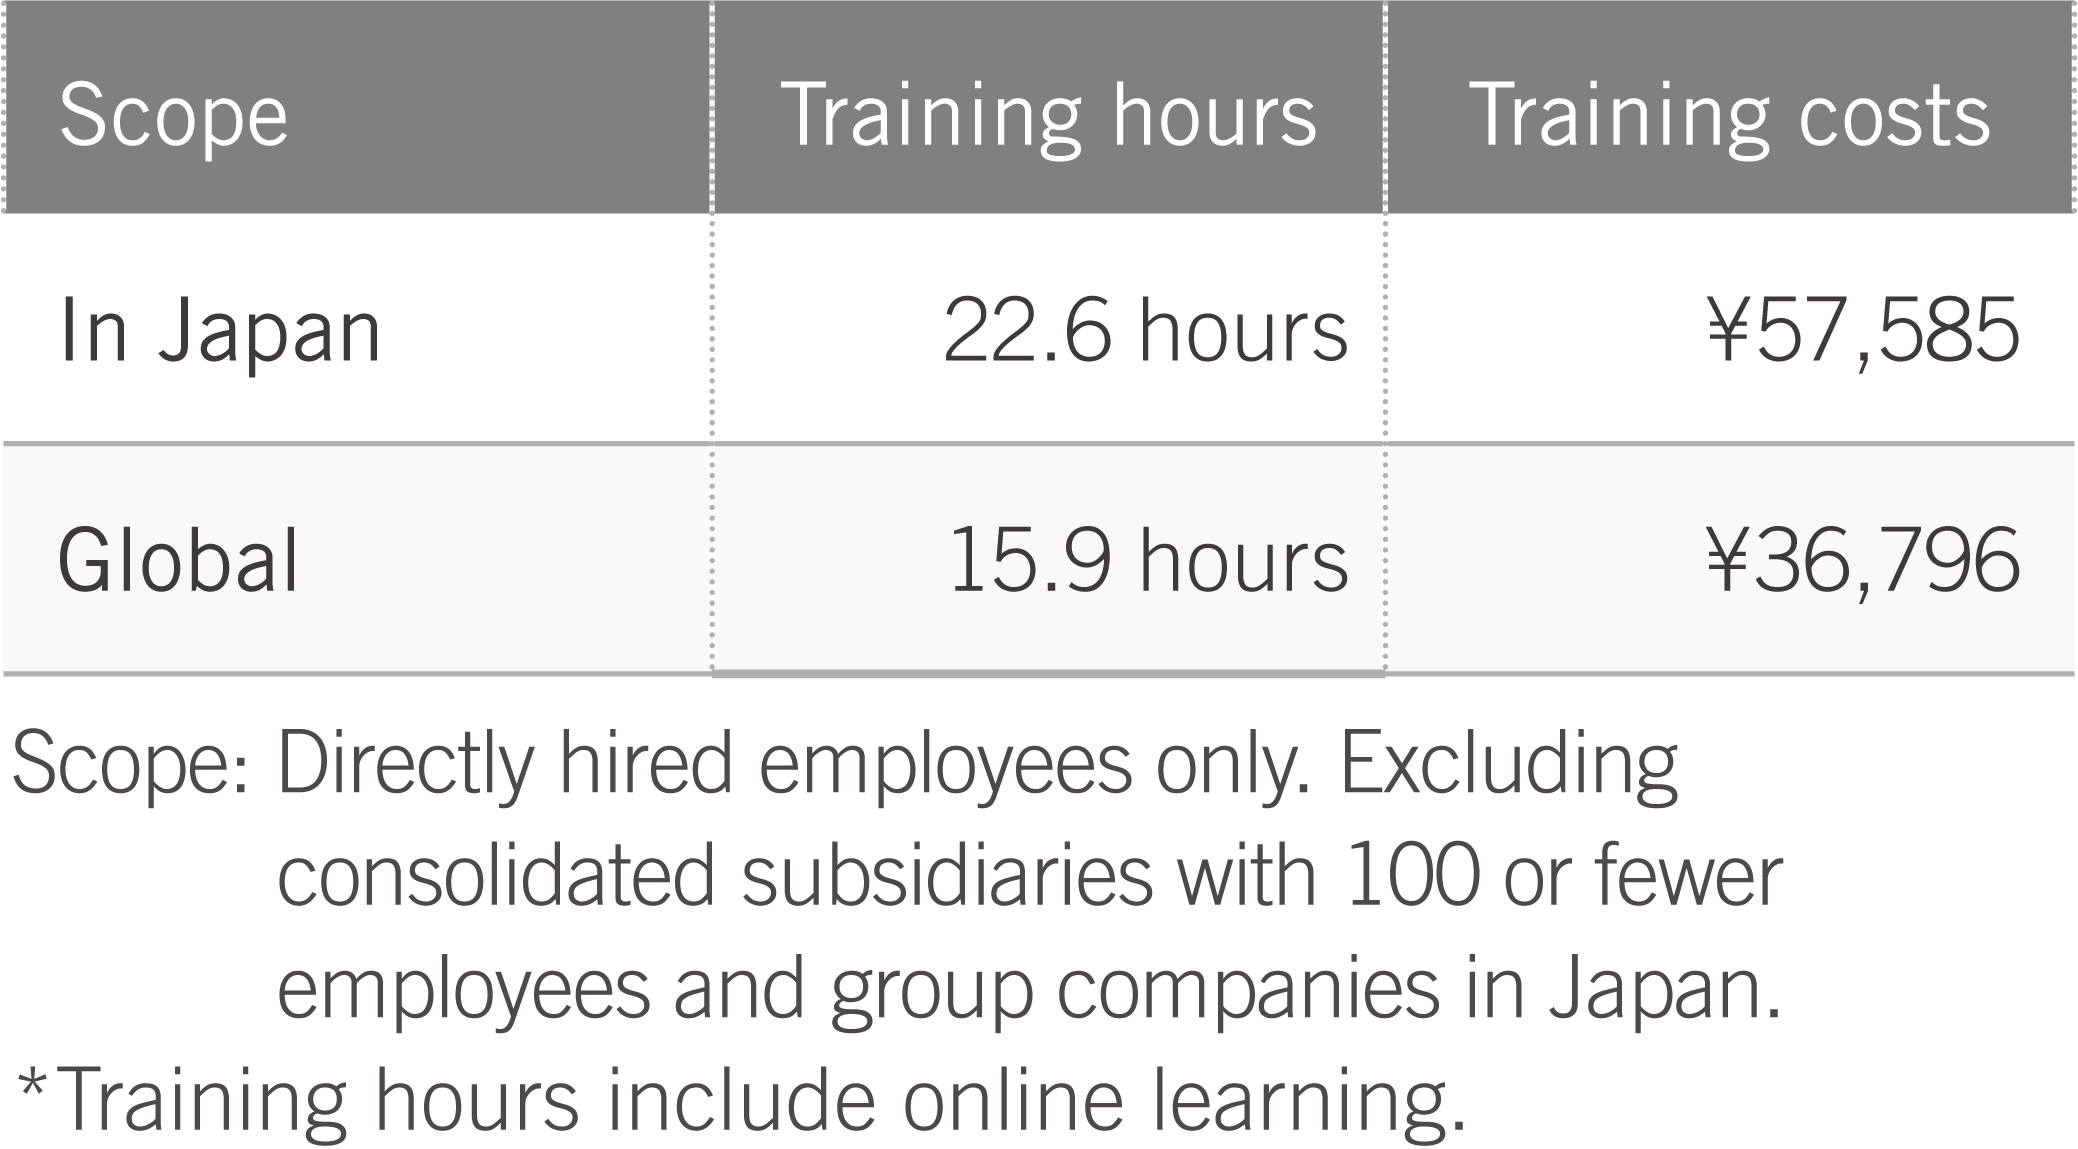 Annual Training Hours and Costs per Employee (FYE2022)